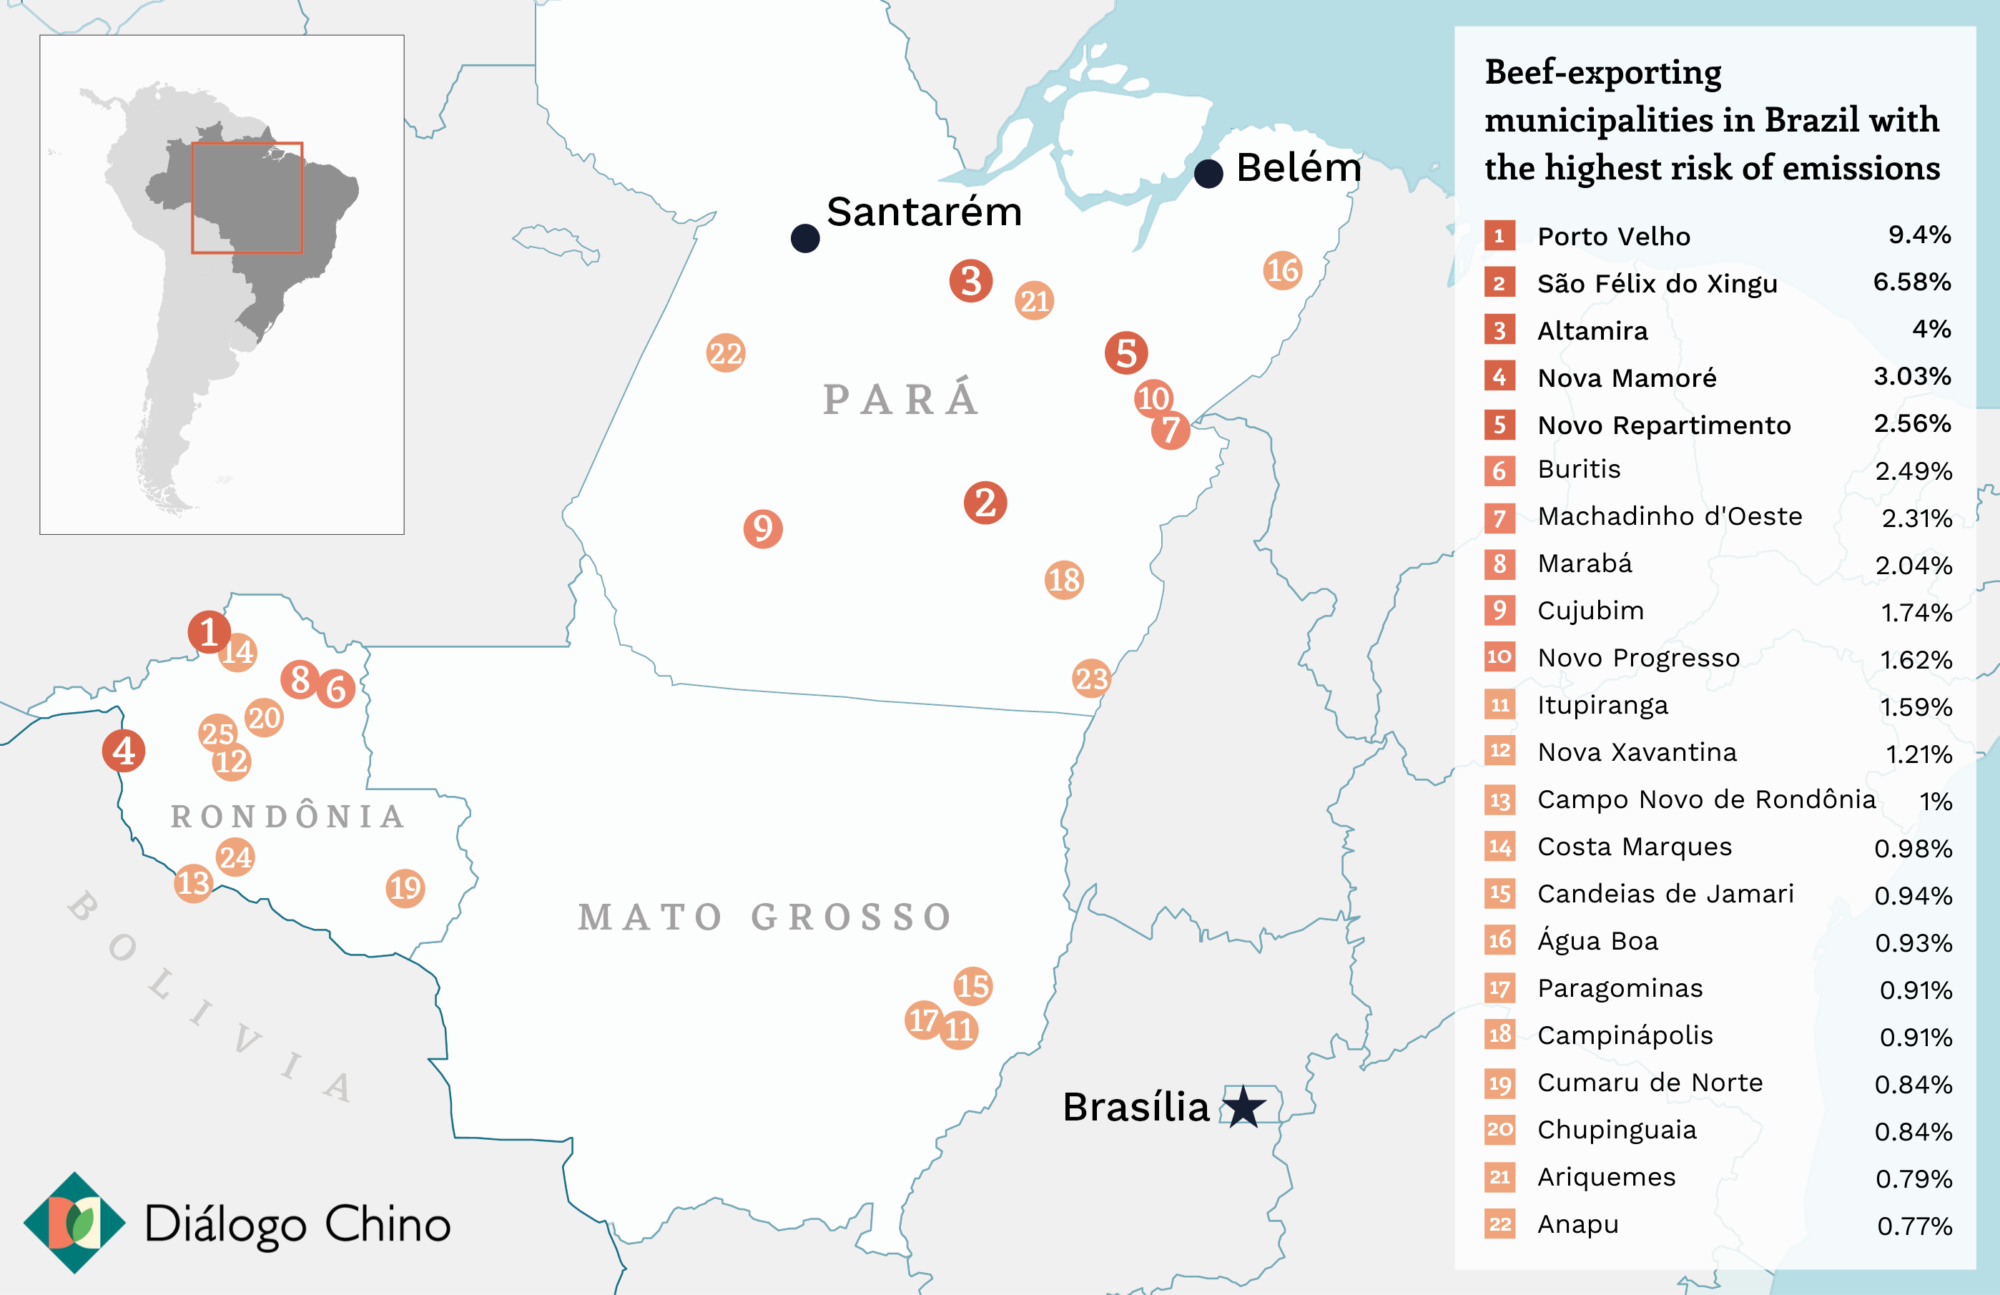 map that shows beef exporting cities in brazil with highest emissions risk